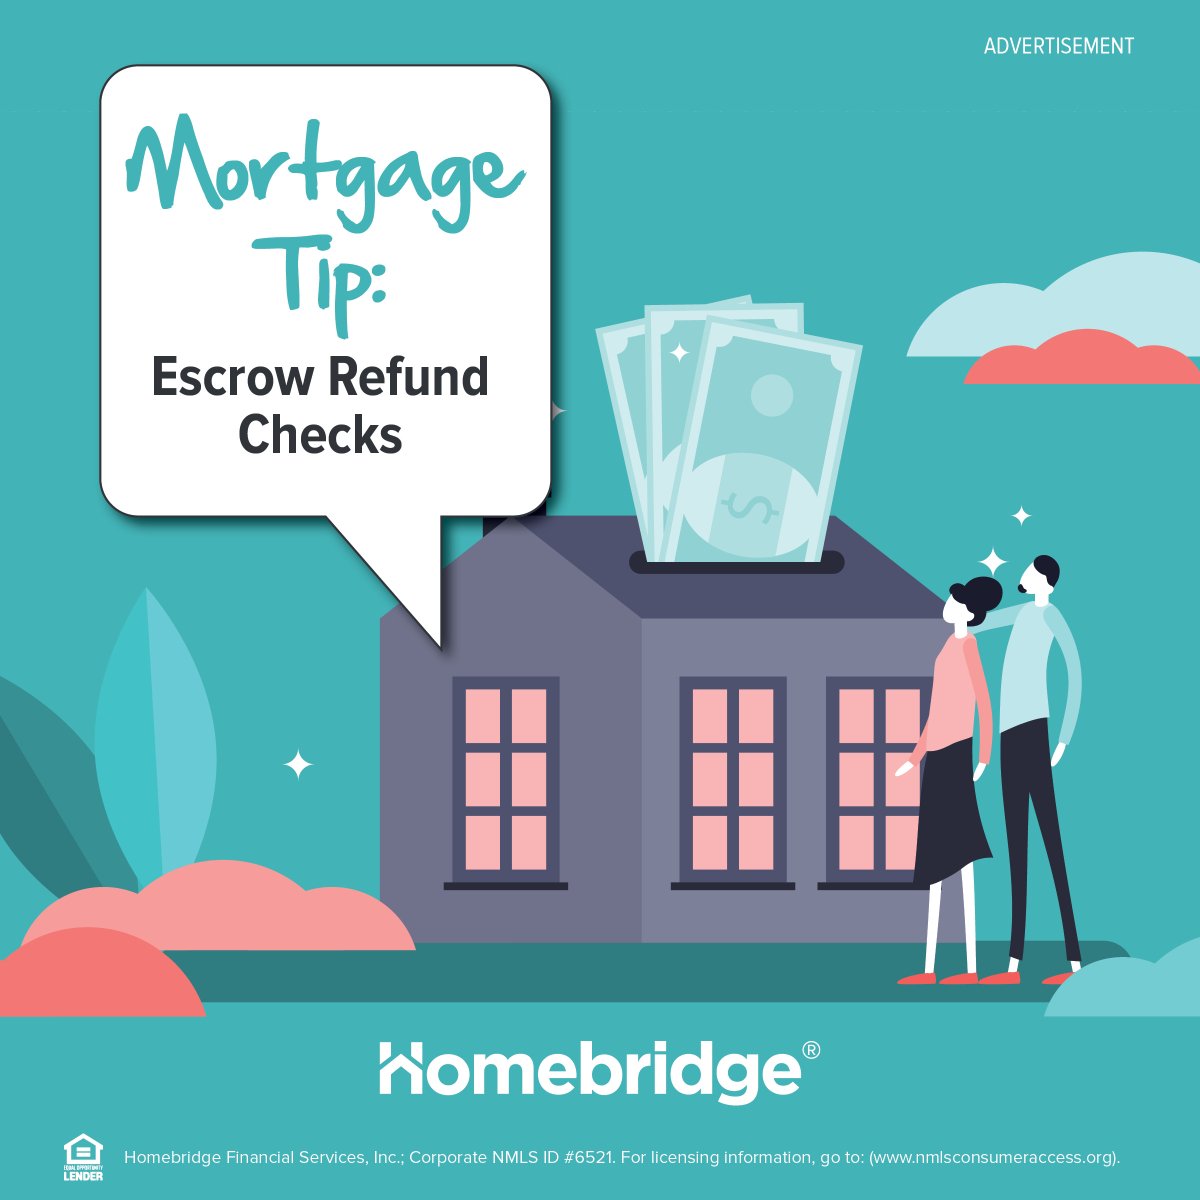 Here's a #MortgageTip for you, instead of spending your escrow refund, invest it back into your mortgage! Use this refund to make an extra payment towards your principal balance. In doing so, you will decrease your loan amount. Want more tips? Drop your questions in the comments!